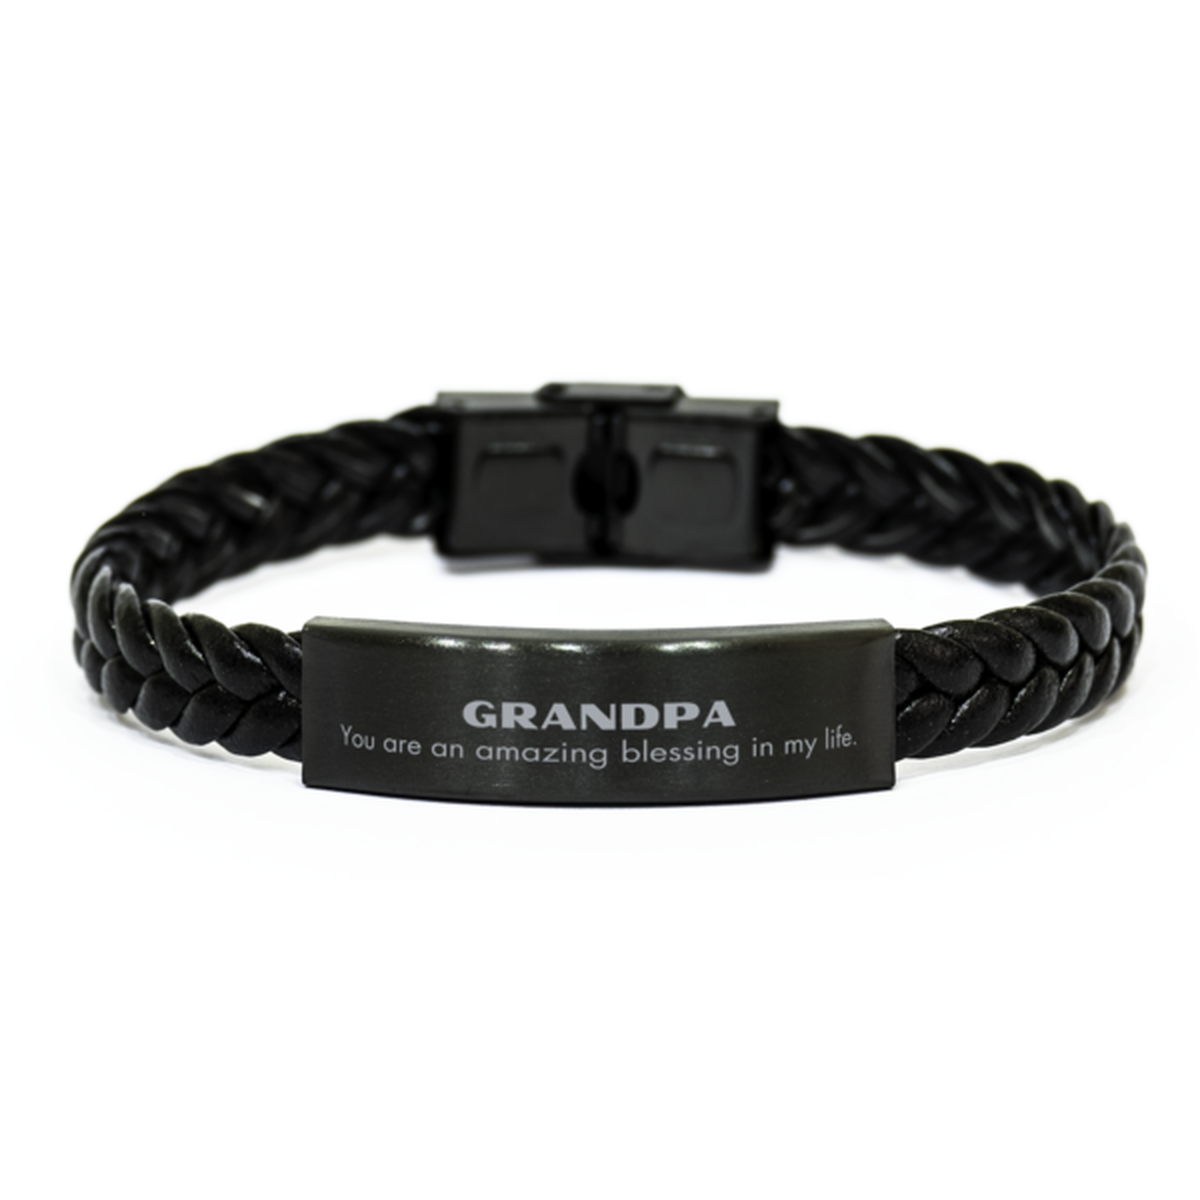 Grandpa Braided Leather Bracelet, You are an amazing blessing in my life, Thank You Gifts For Grandpa, Inspirational Birthday Christmas Unique Gifts For Grandpa